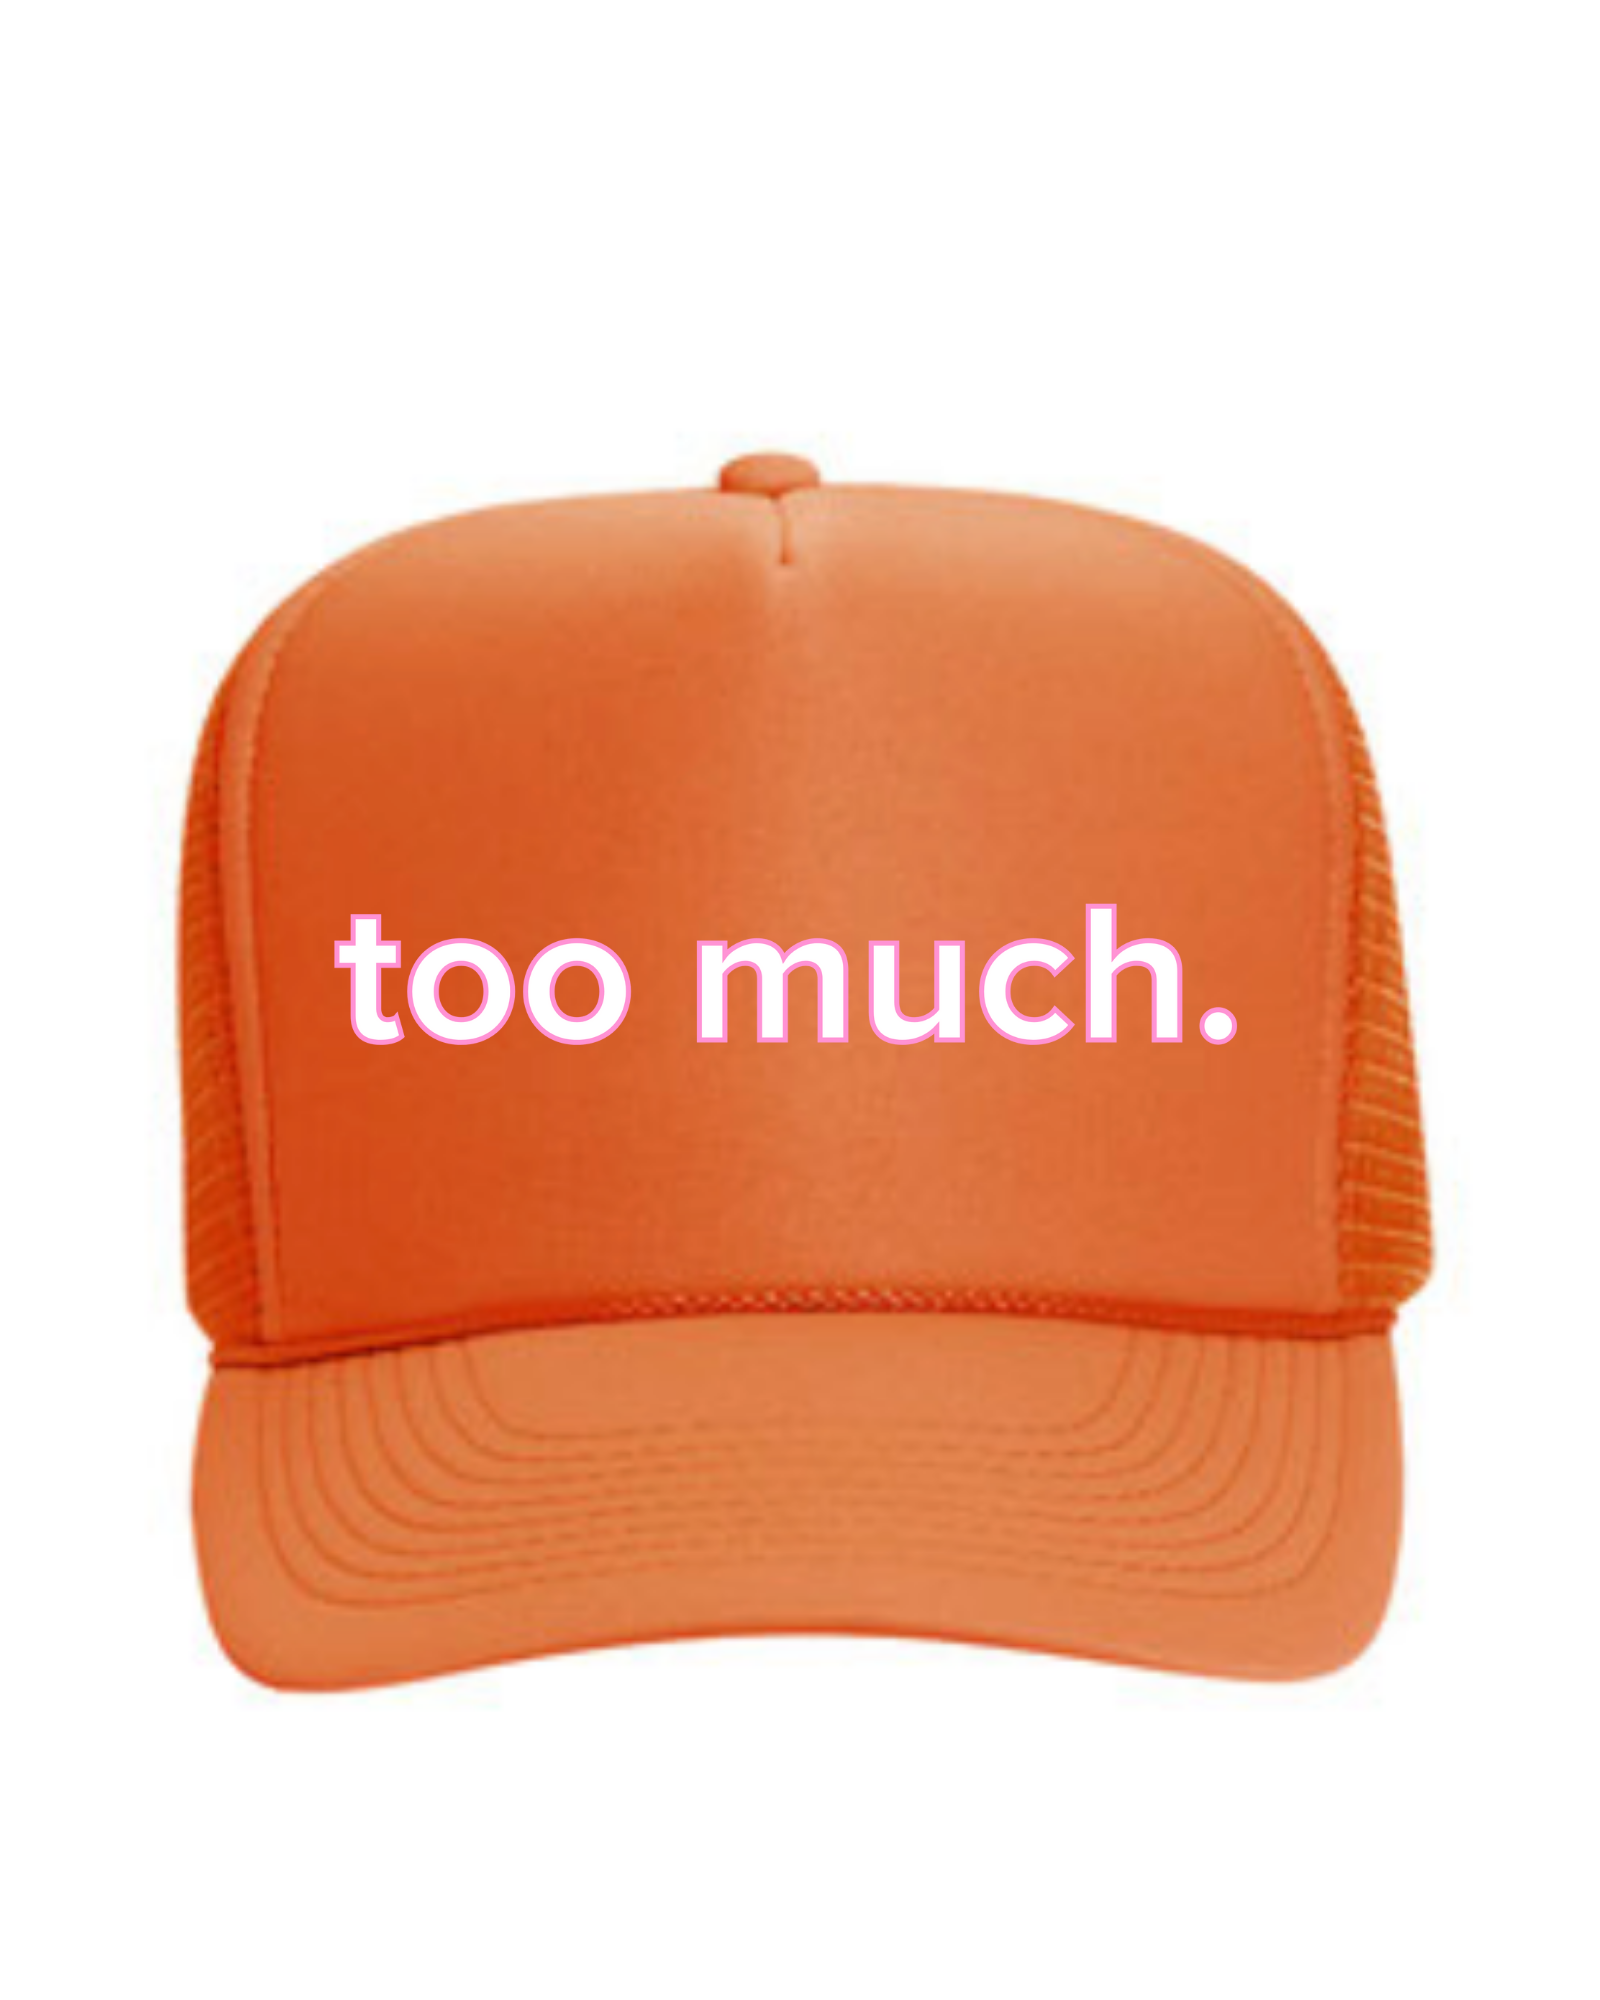 "Too Much" Hats